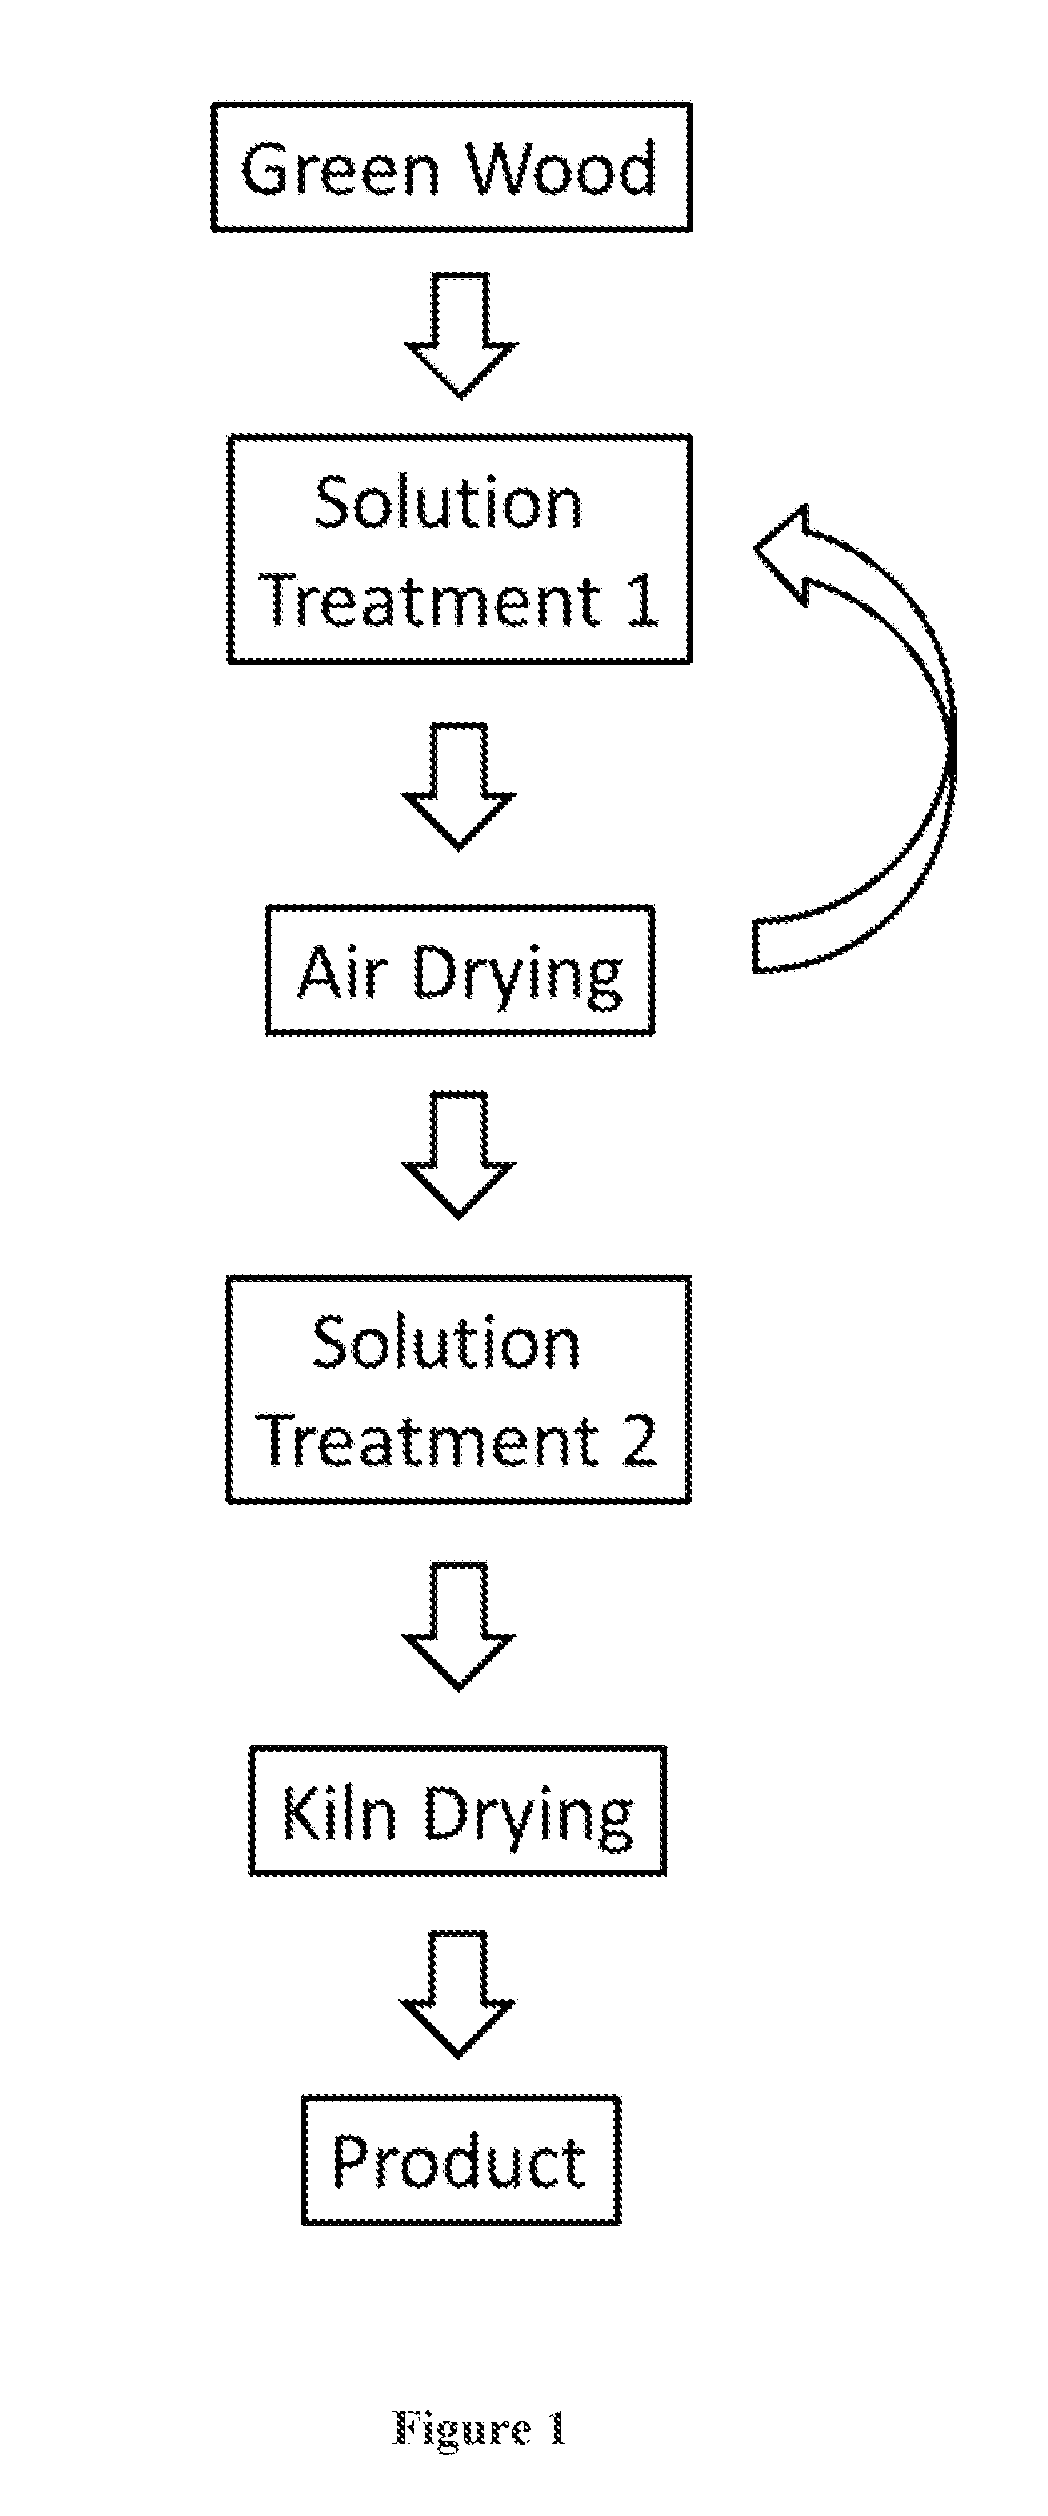 Wood drying and preservation methods